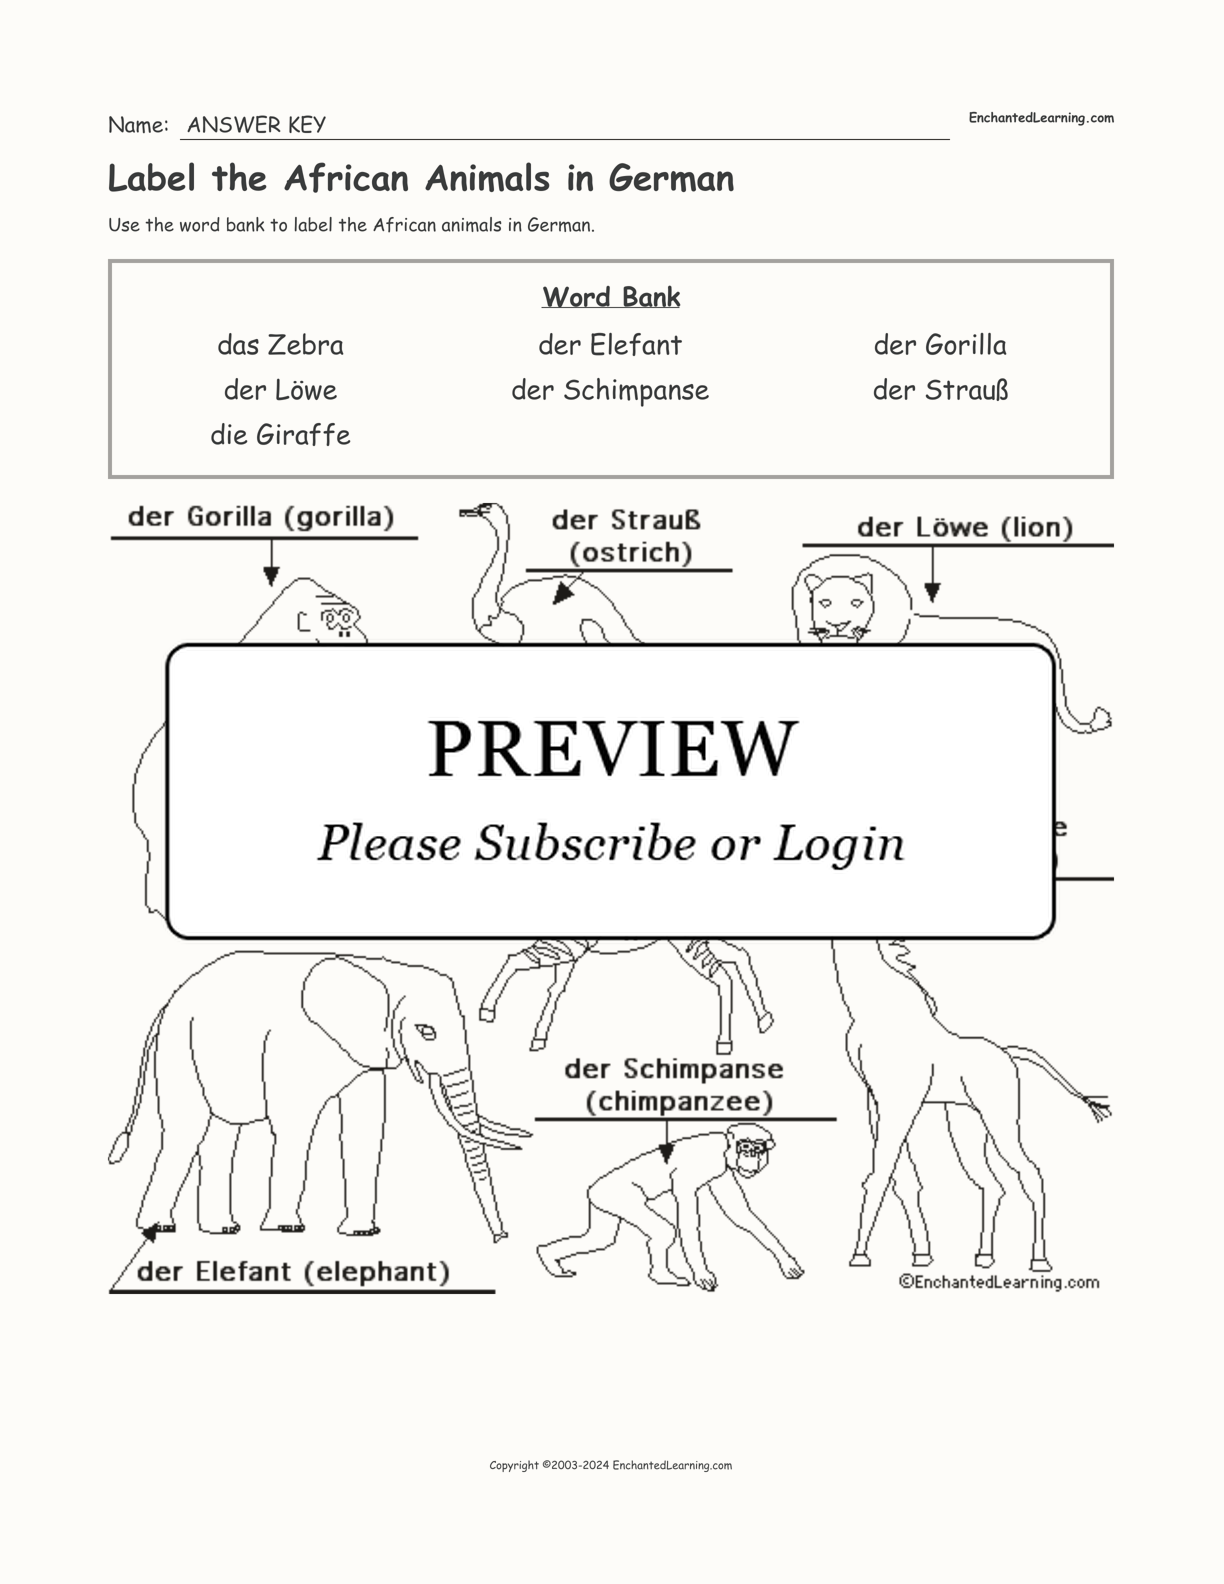 Label the African Animals in German interactive worksheet page 2